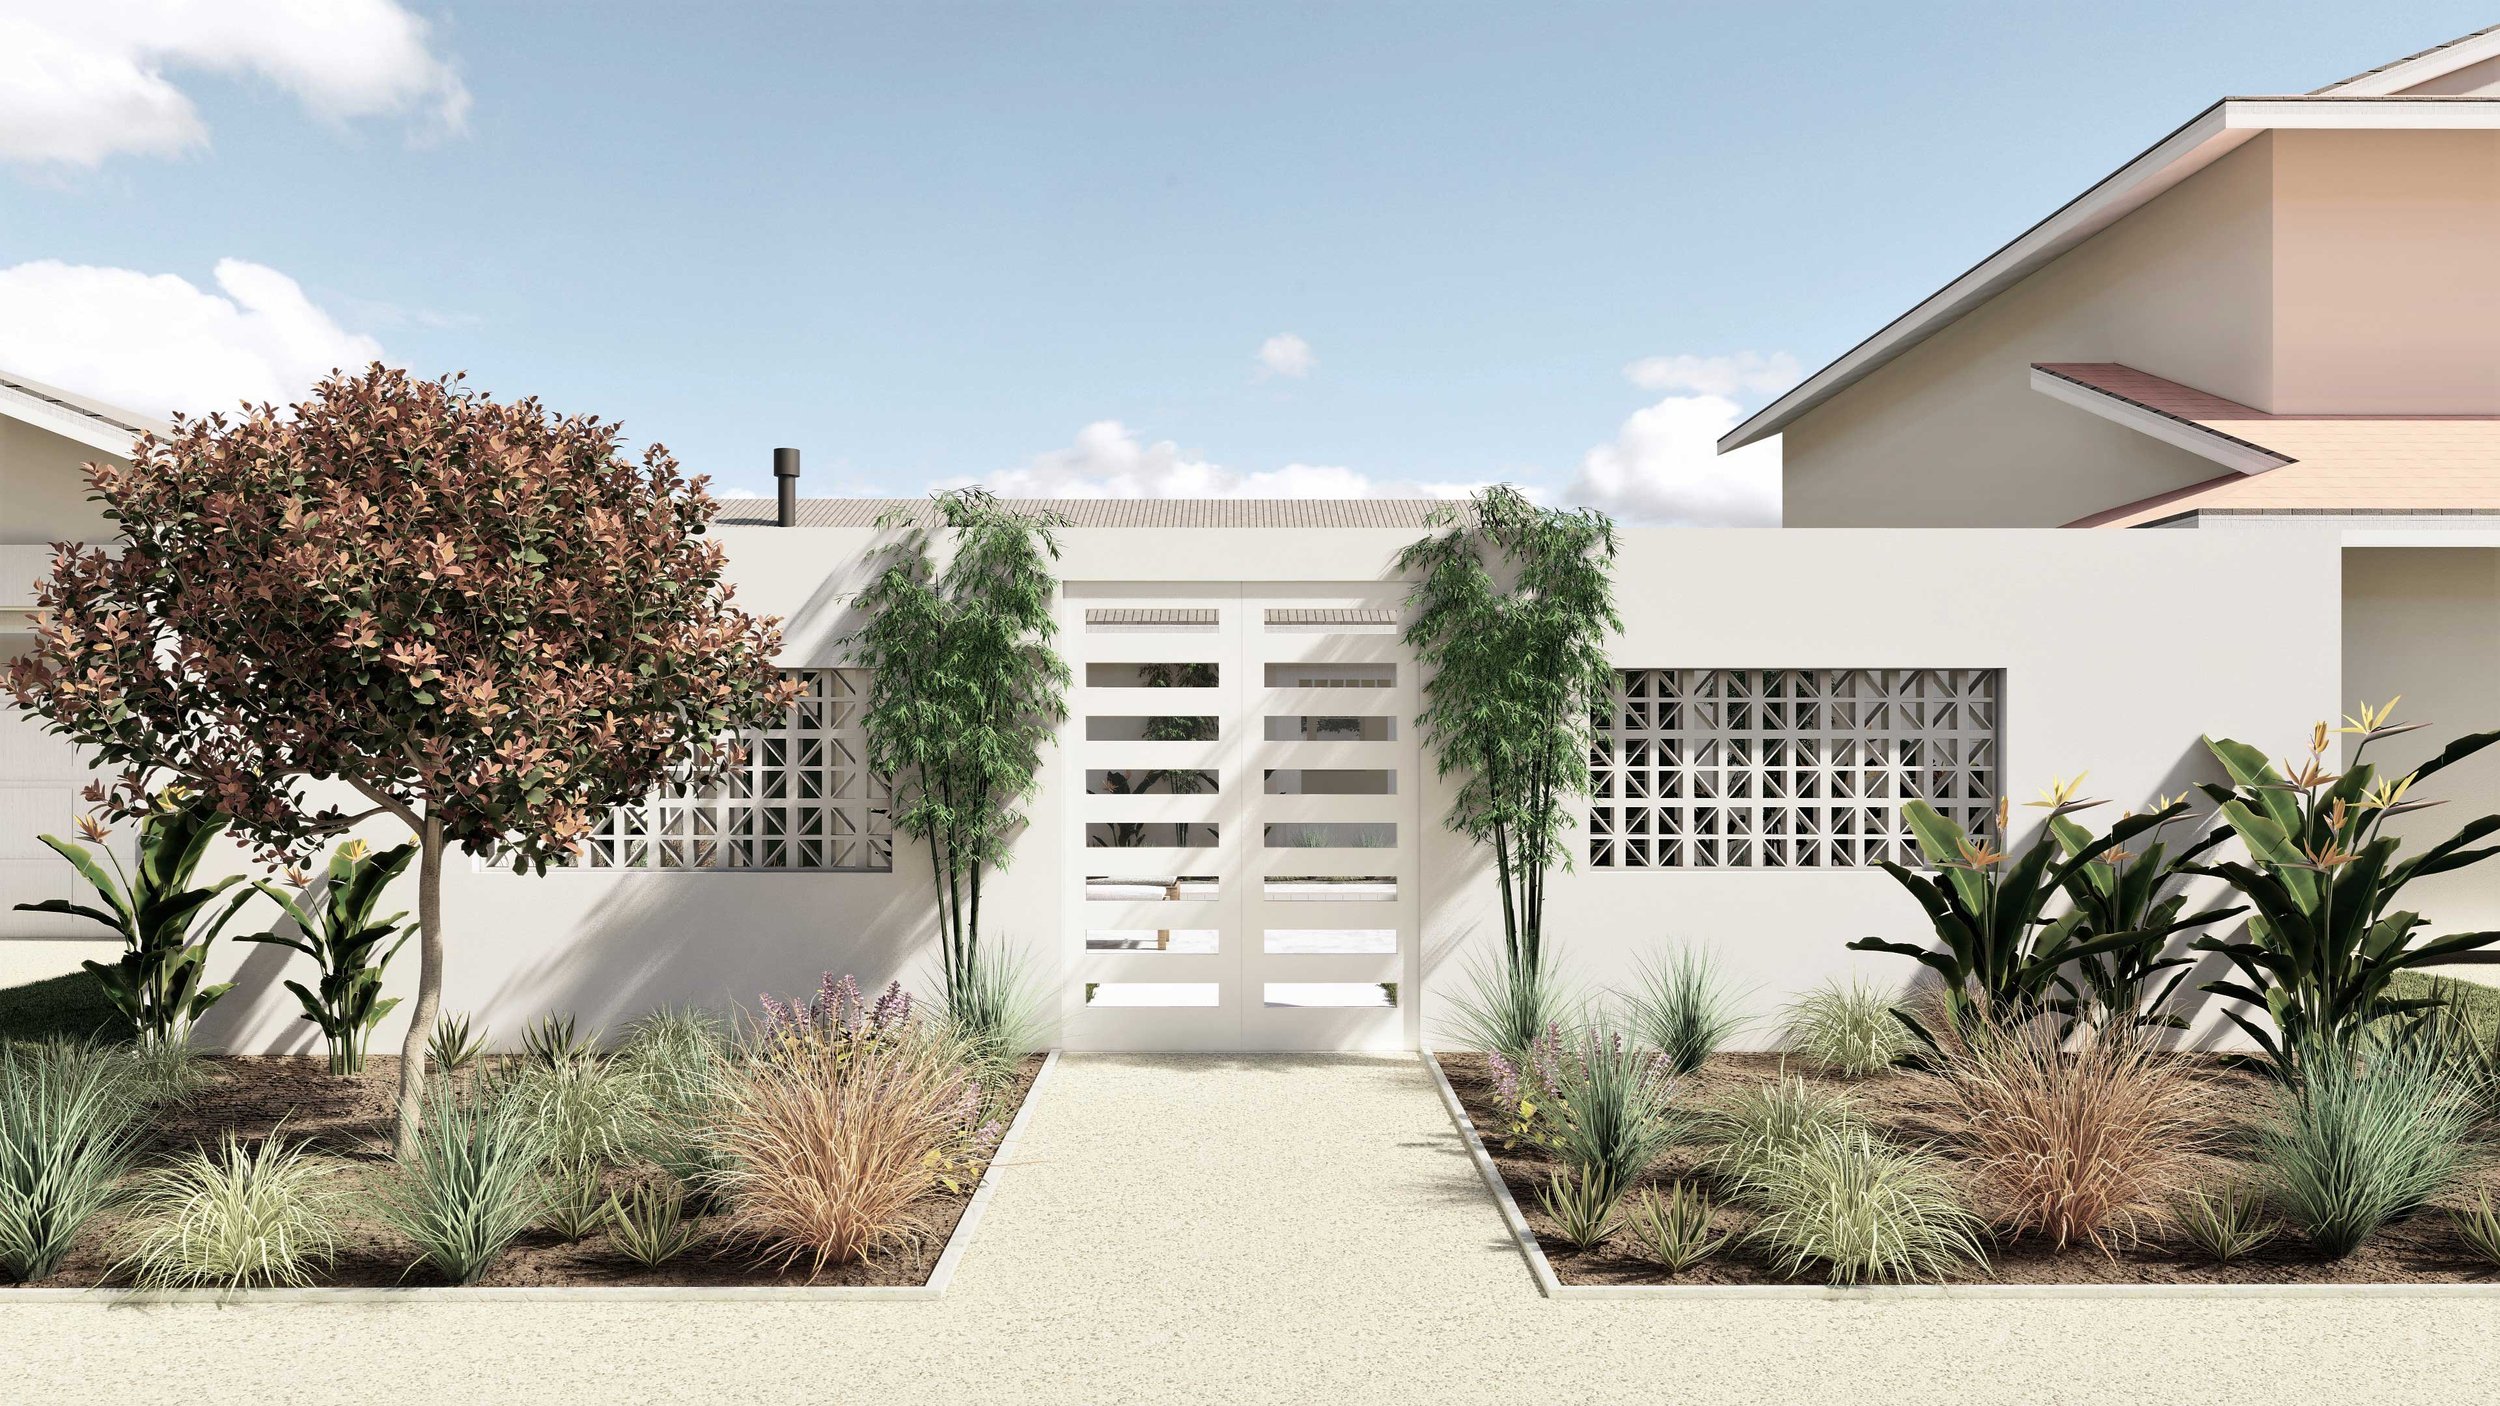 Gated front yard with drought tolerant plantings and gravel walkway